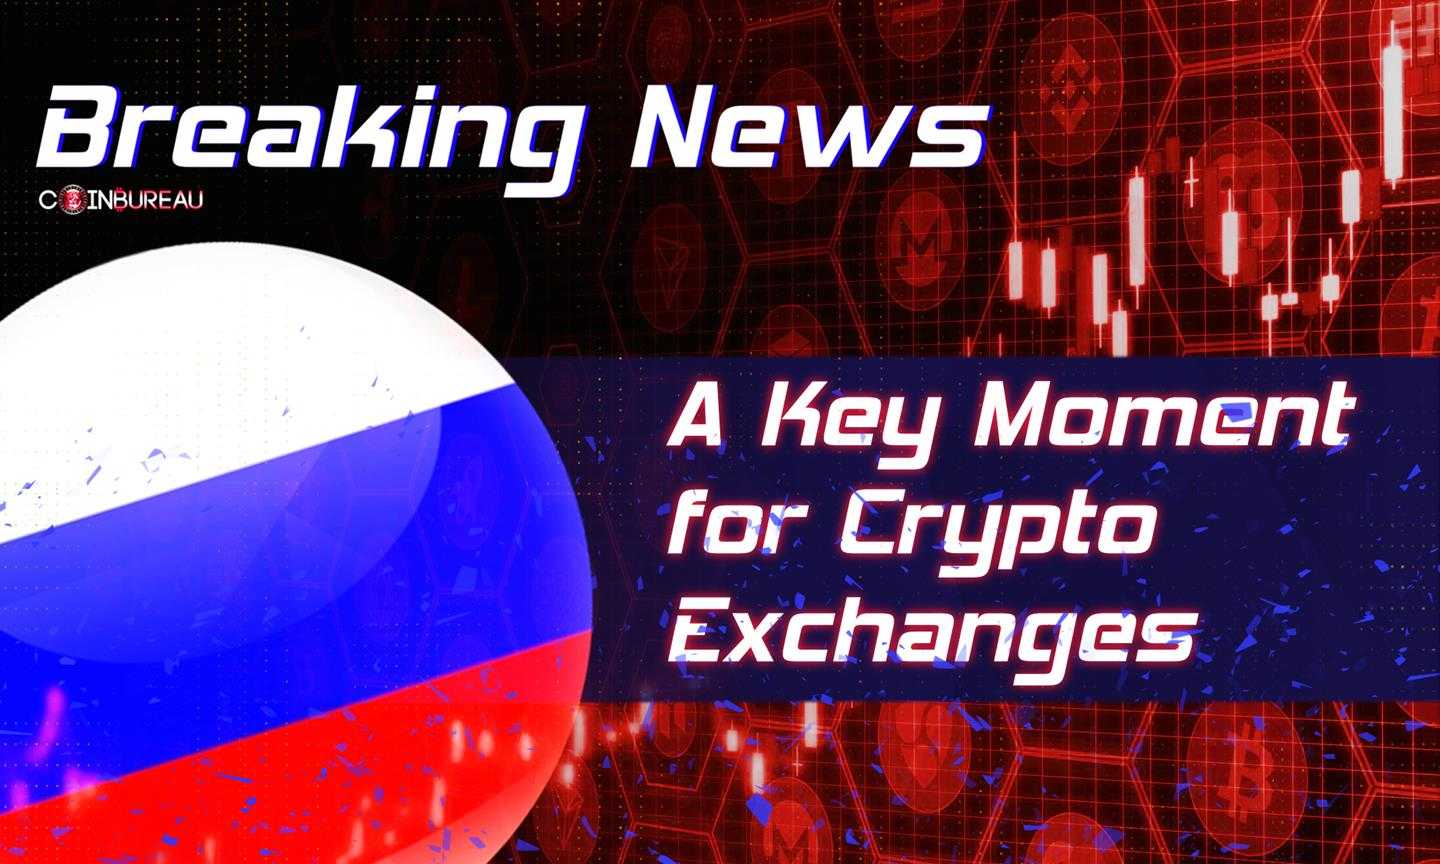 Russian Sanctions Pose a Key Moment for Crypto Exchanges